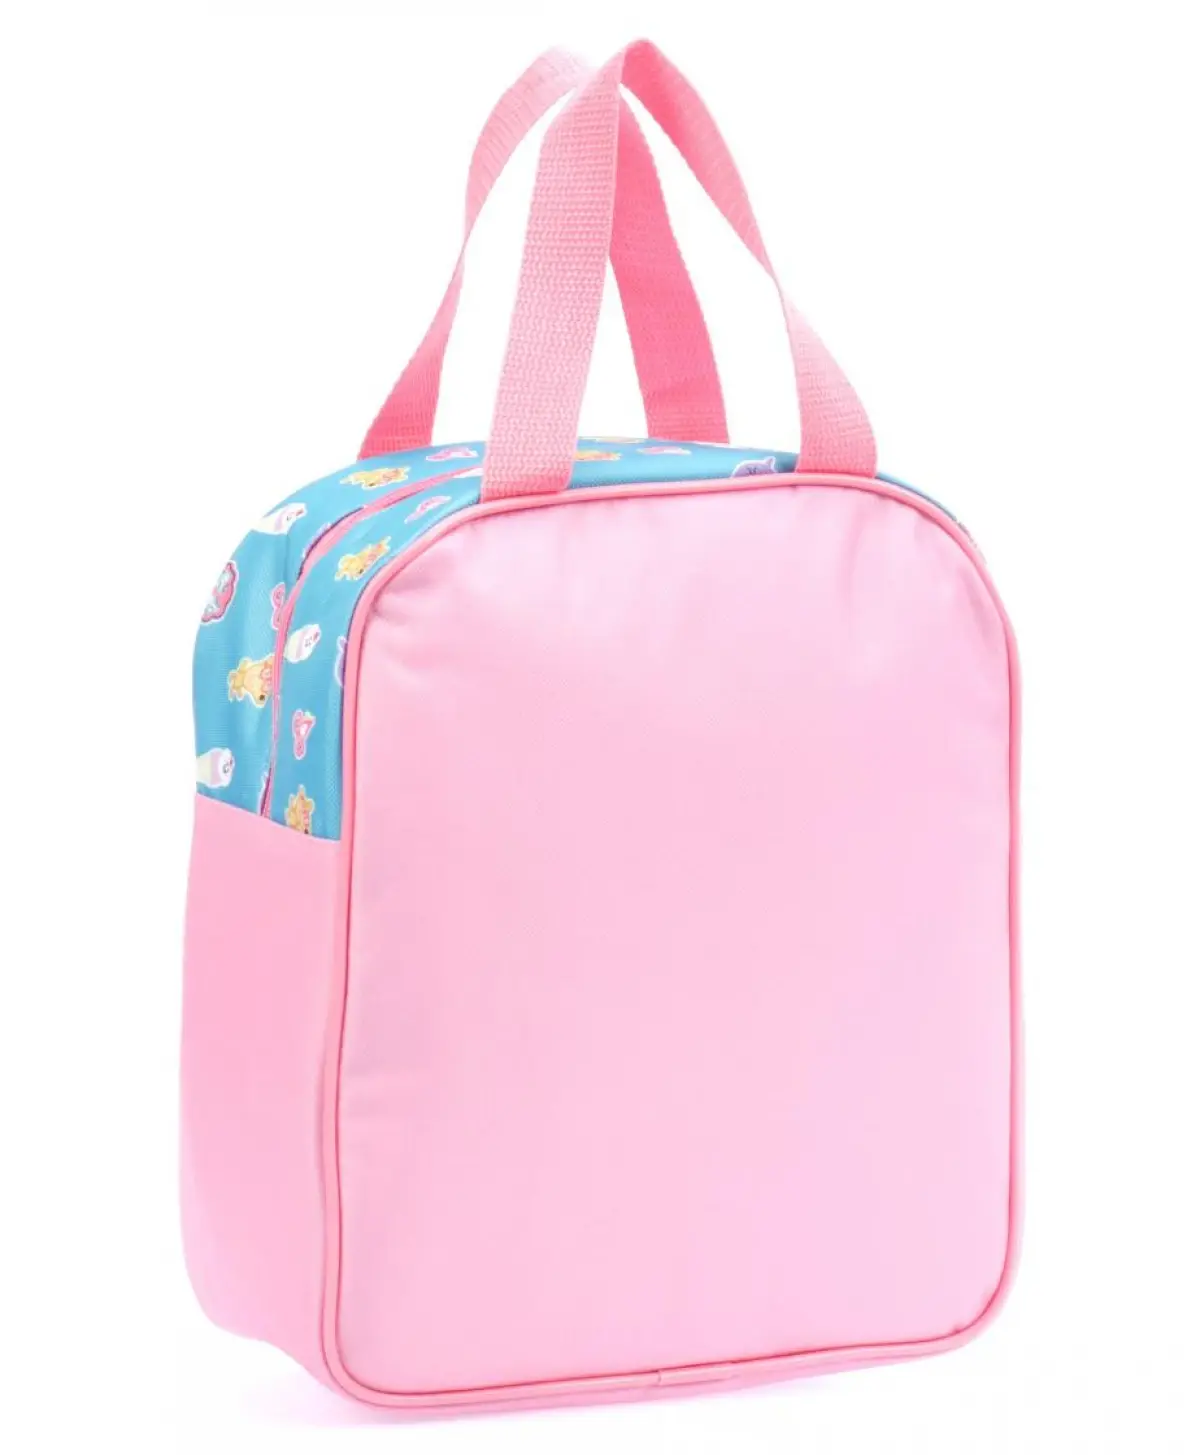 Striders Peppa Pig Lunch Bag - Adorable and Functional Lunchbox for Kids with Insulated Design